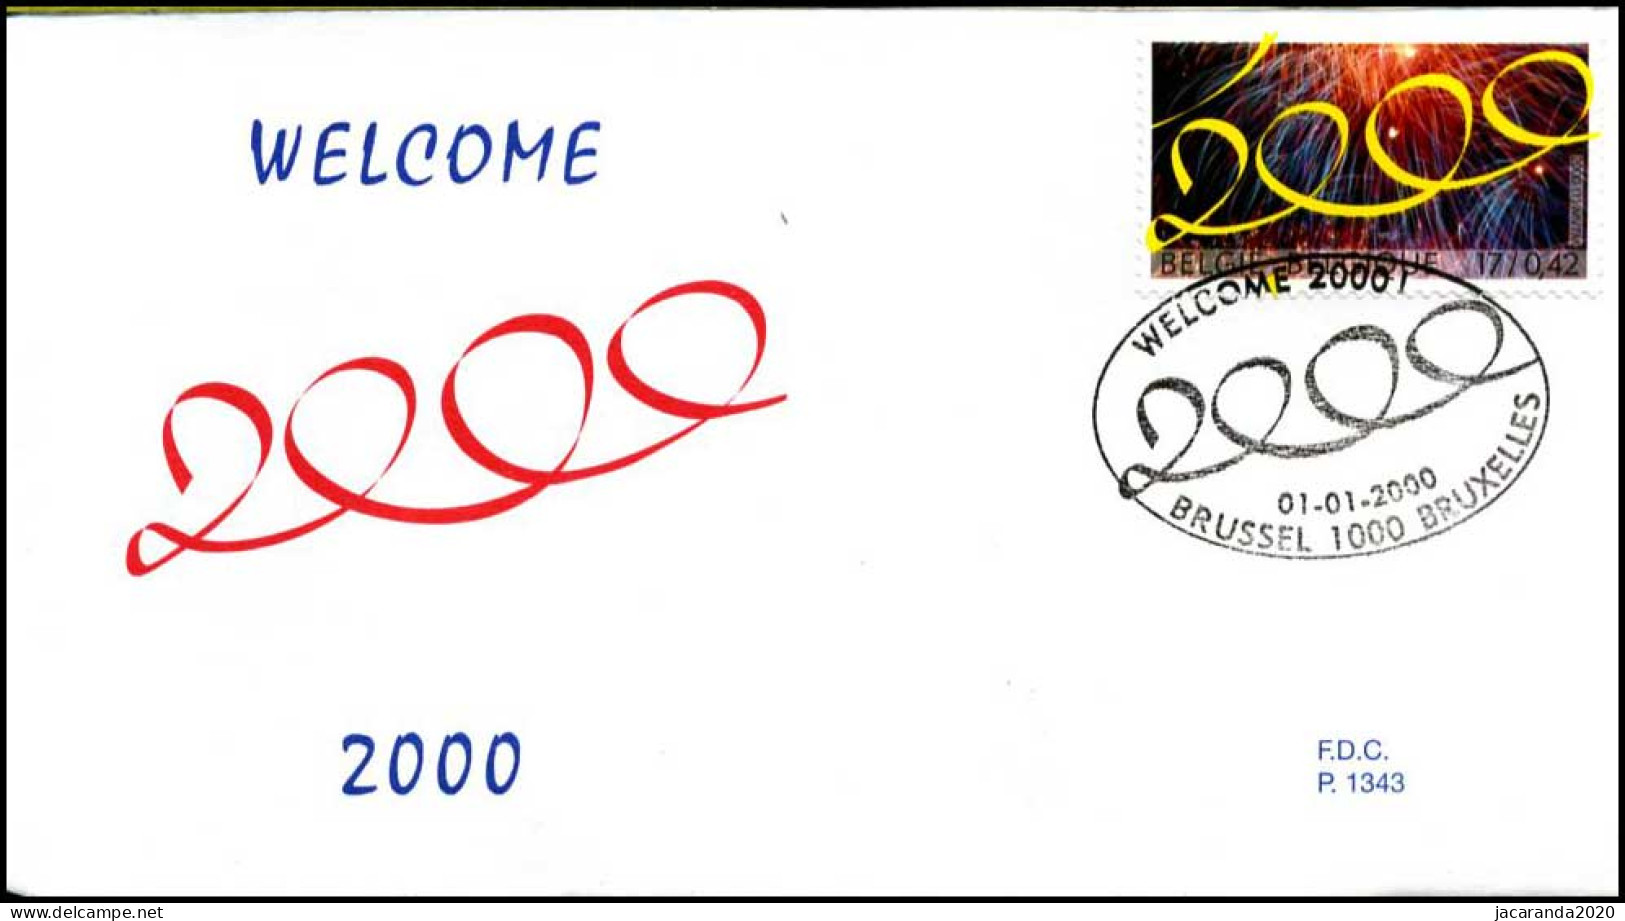 2878 - FDC - Welcome 2000 #1 P1343 - 1991-2000